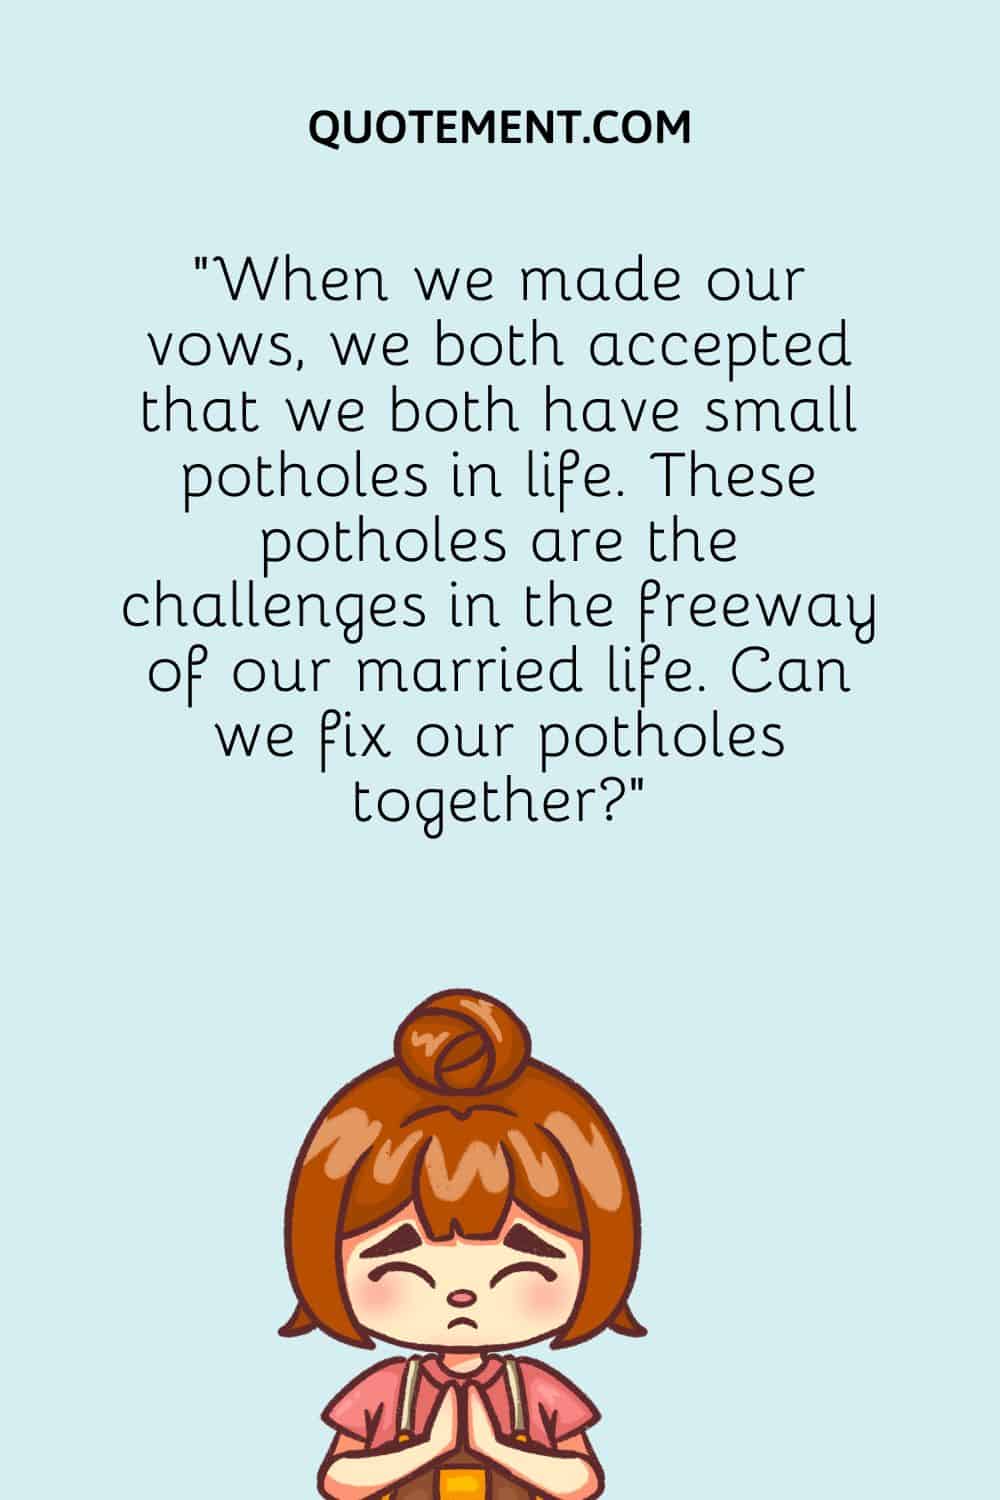 When we made our vows, we both accepted that we both have small potholes in life